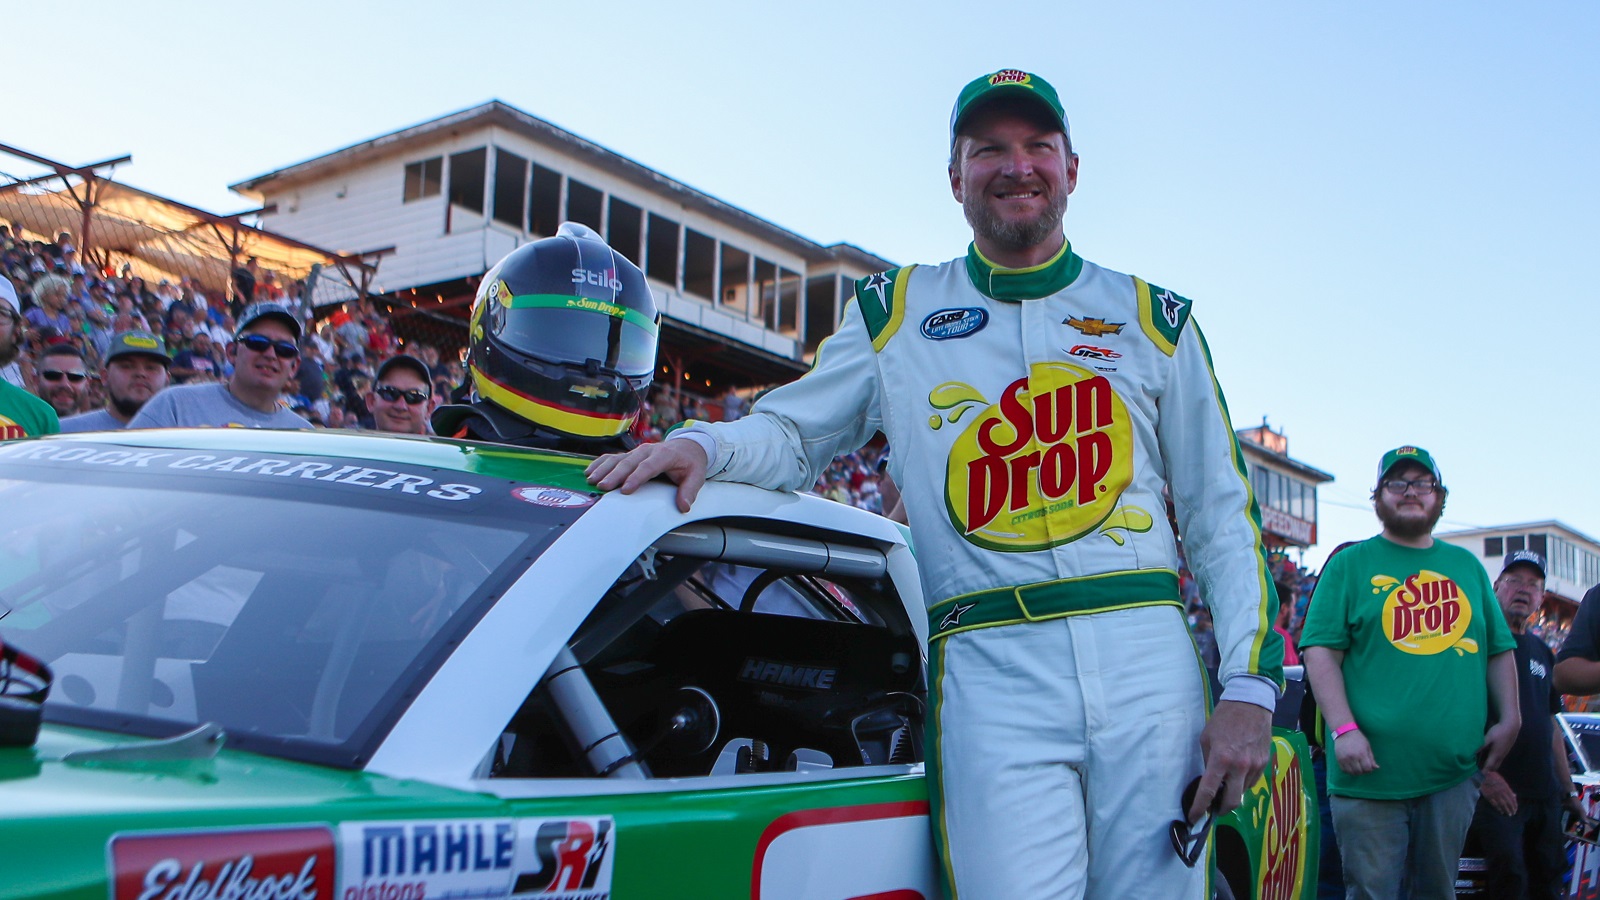 Dale Earnhardt Jr. stands next to his car on the starting grid moments before the Cars Tour LMSC 125 on Aug 31, 2022, at the North Wilkesboro Speedway. | David Jensen/Icon Sportswire via Getty Images